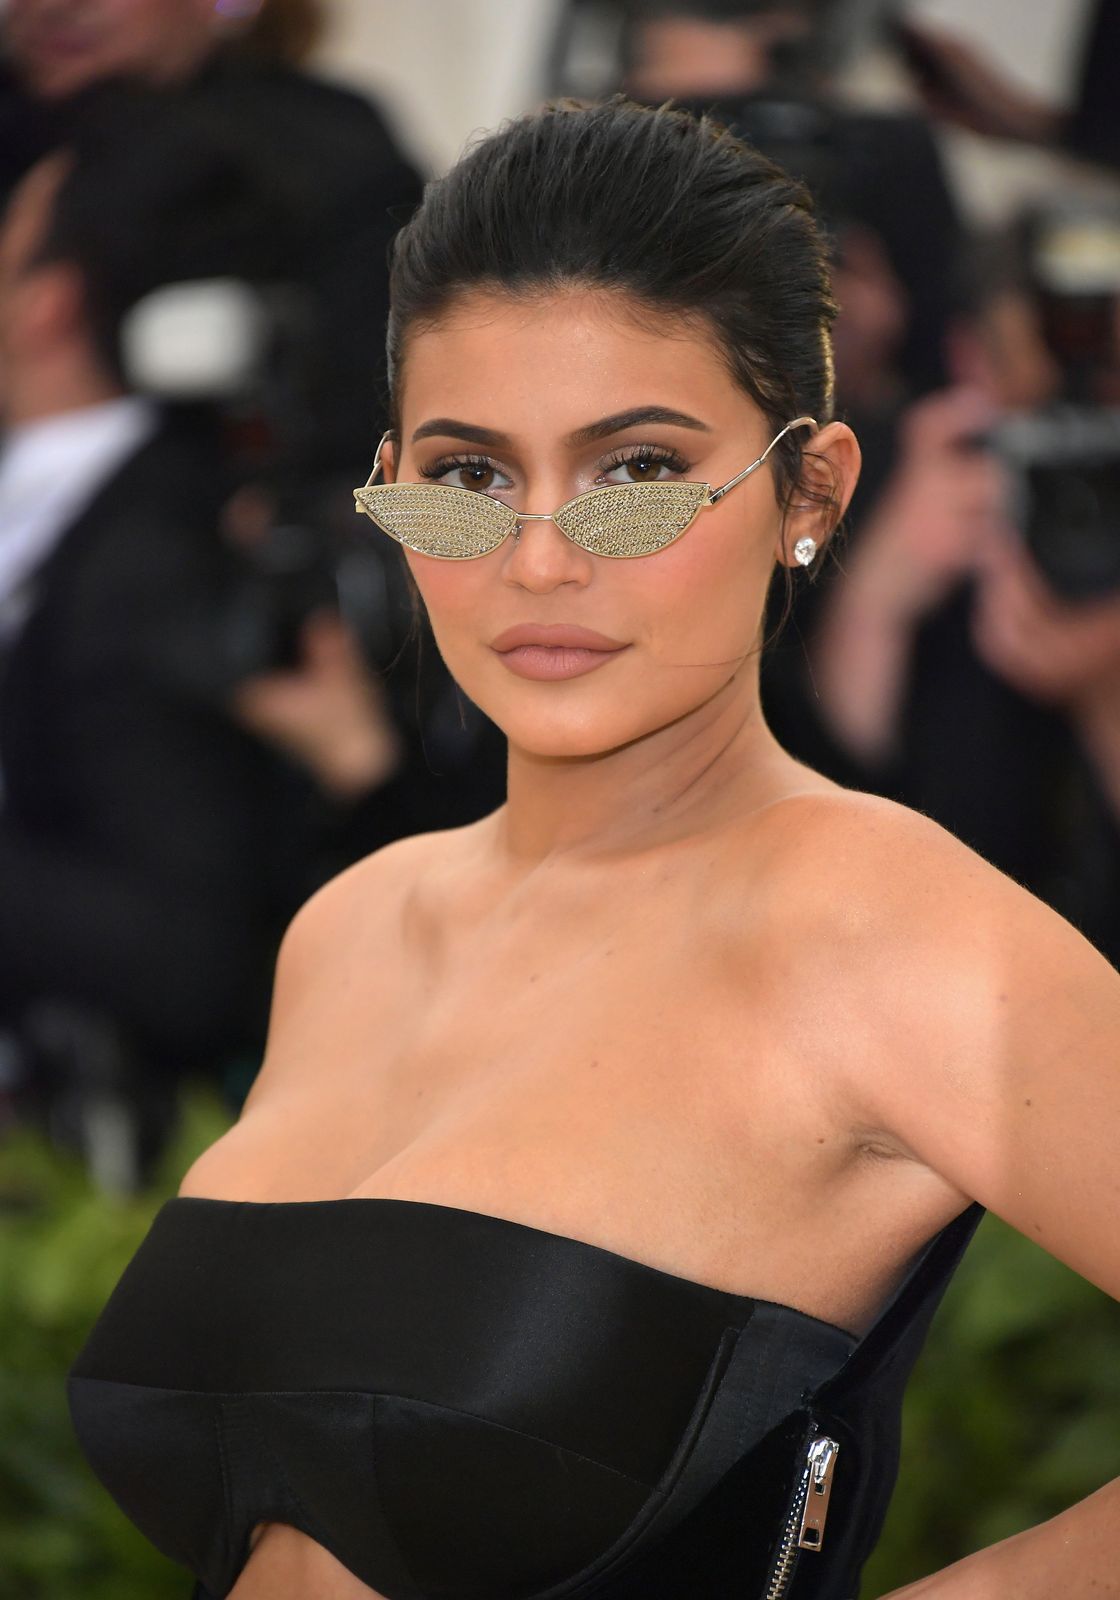 Kylie Jenner at the MET Gala in 2018 in New York City. | Source: Getty Images